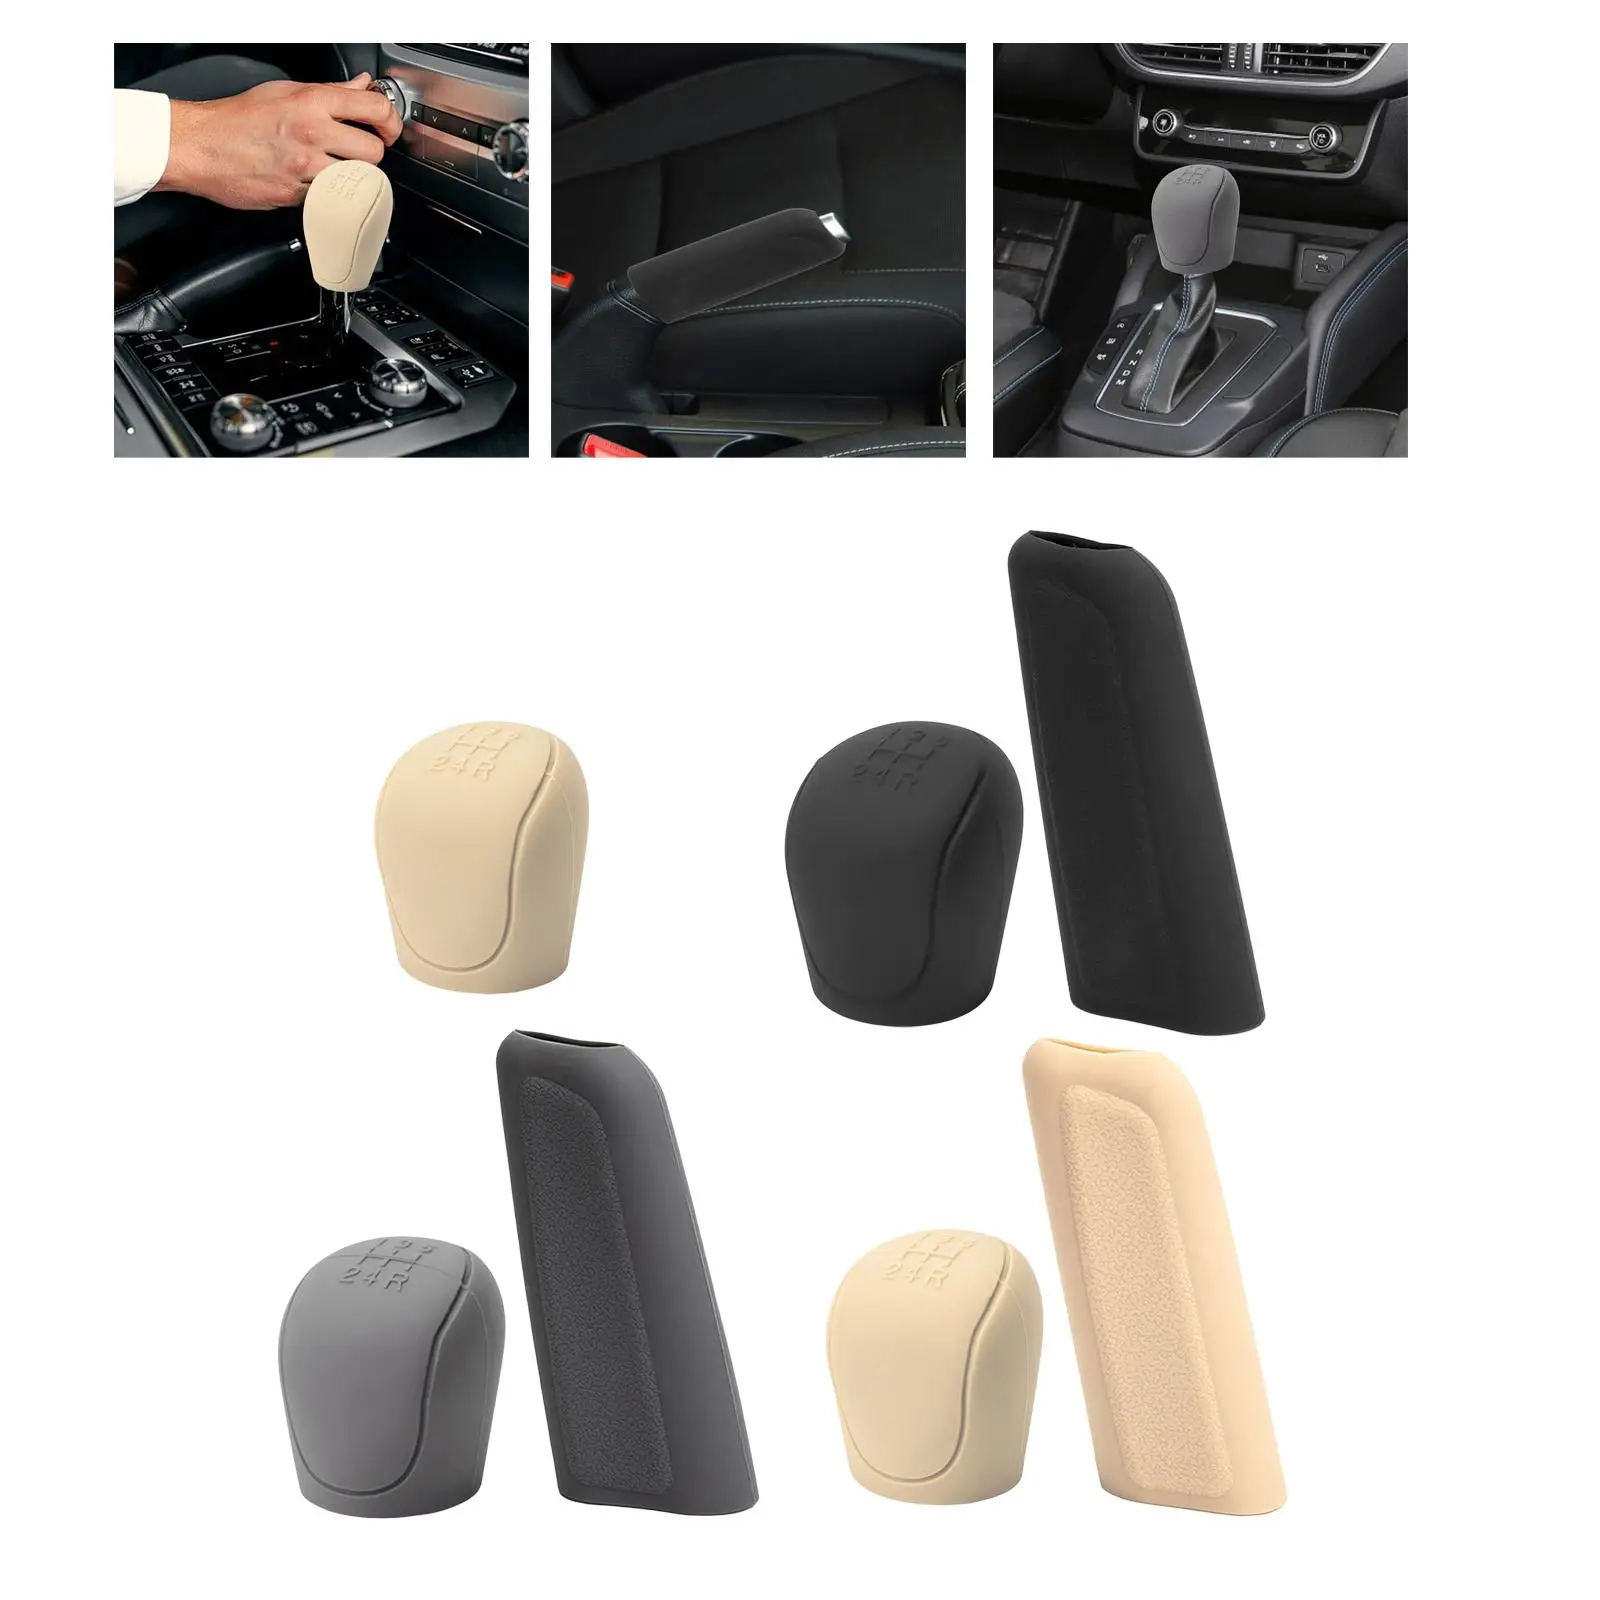 Vehicle Gear Cover Silicone for Transit Accessory